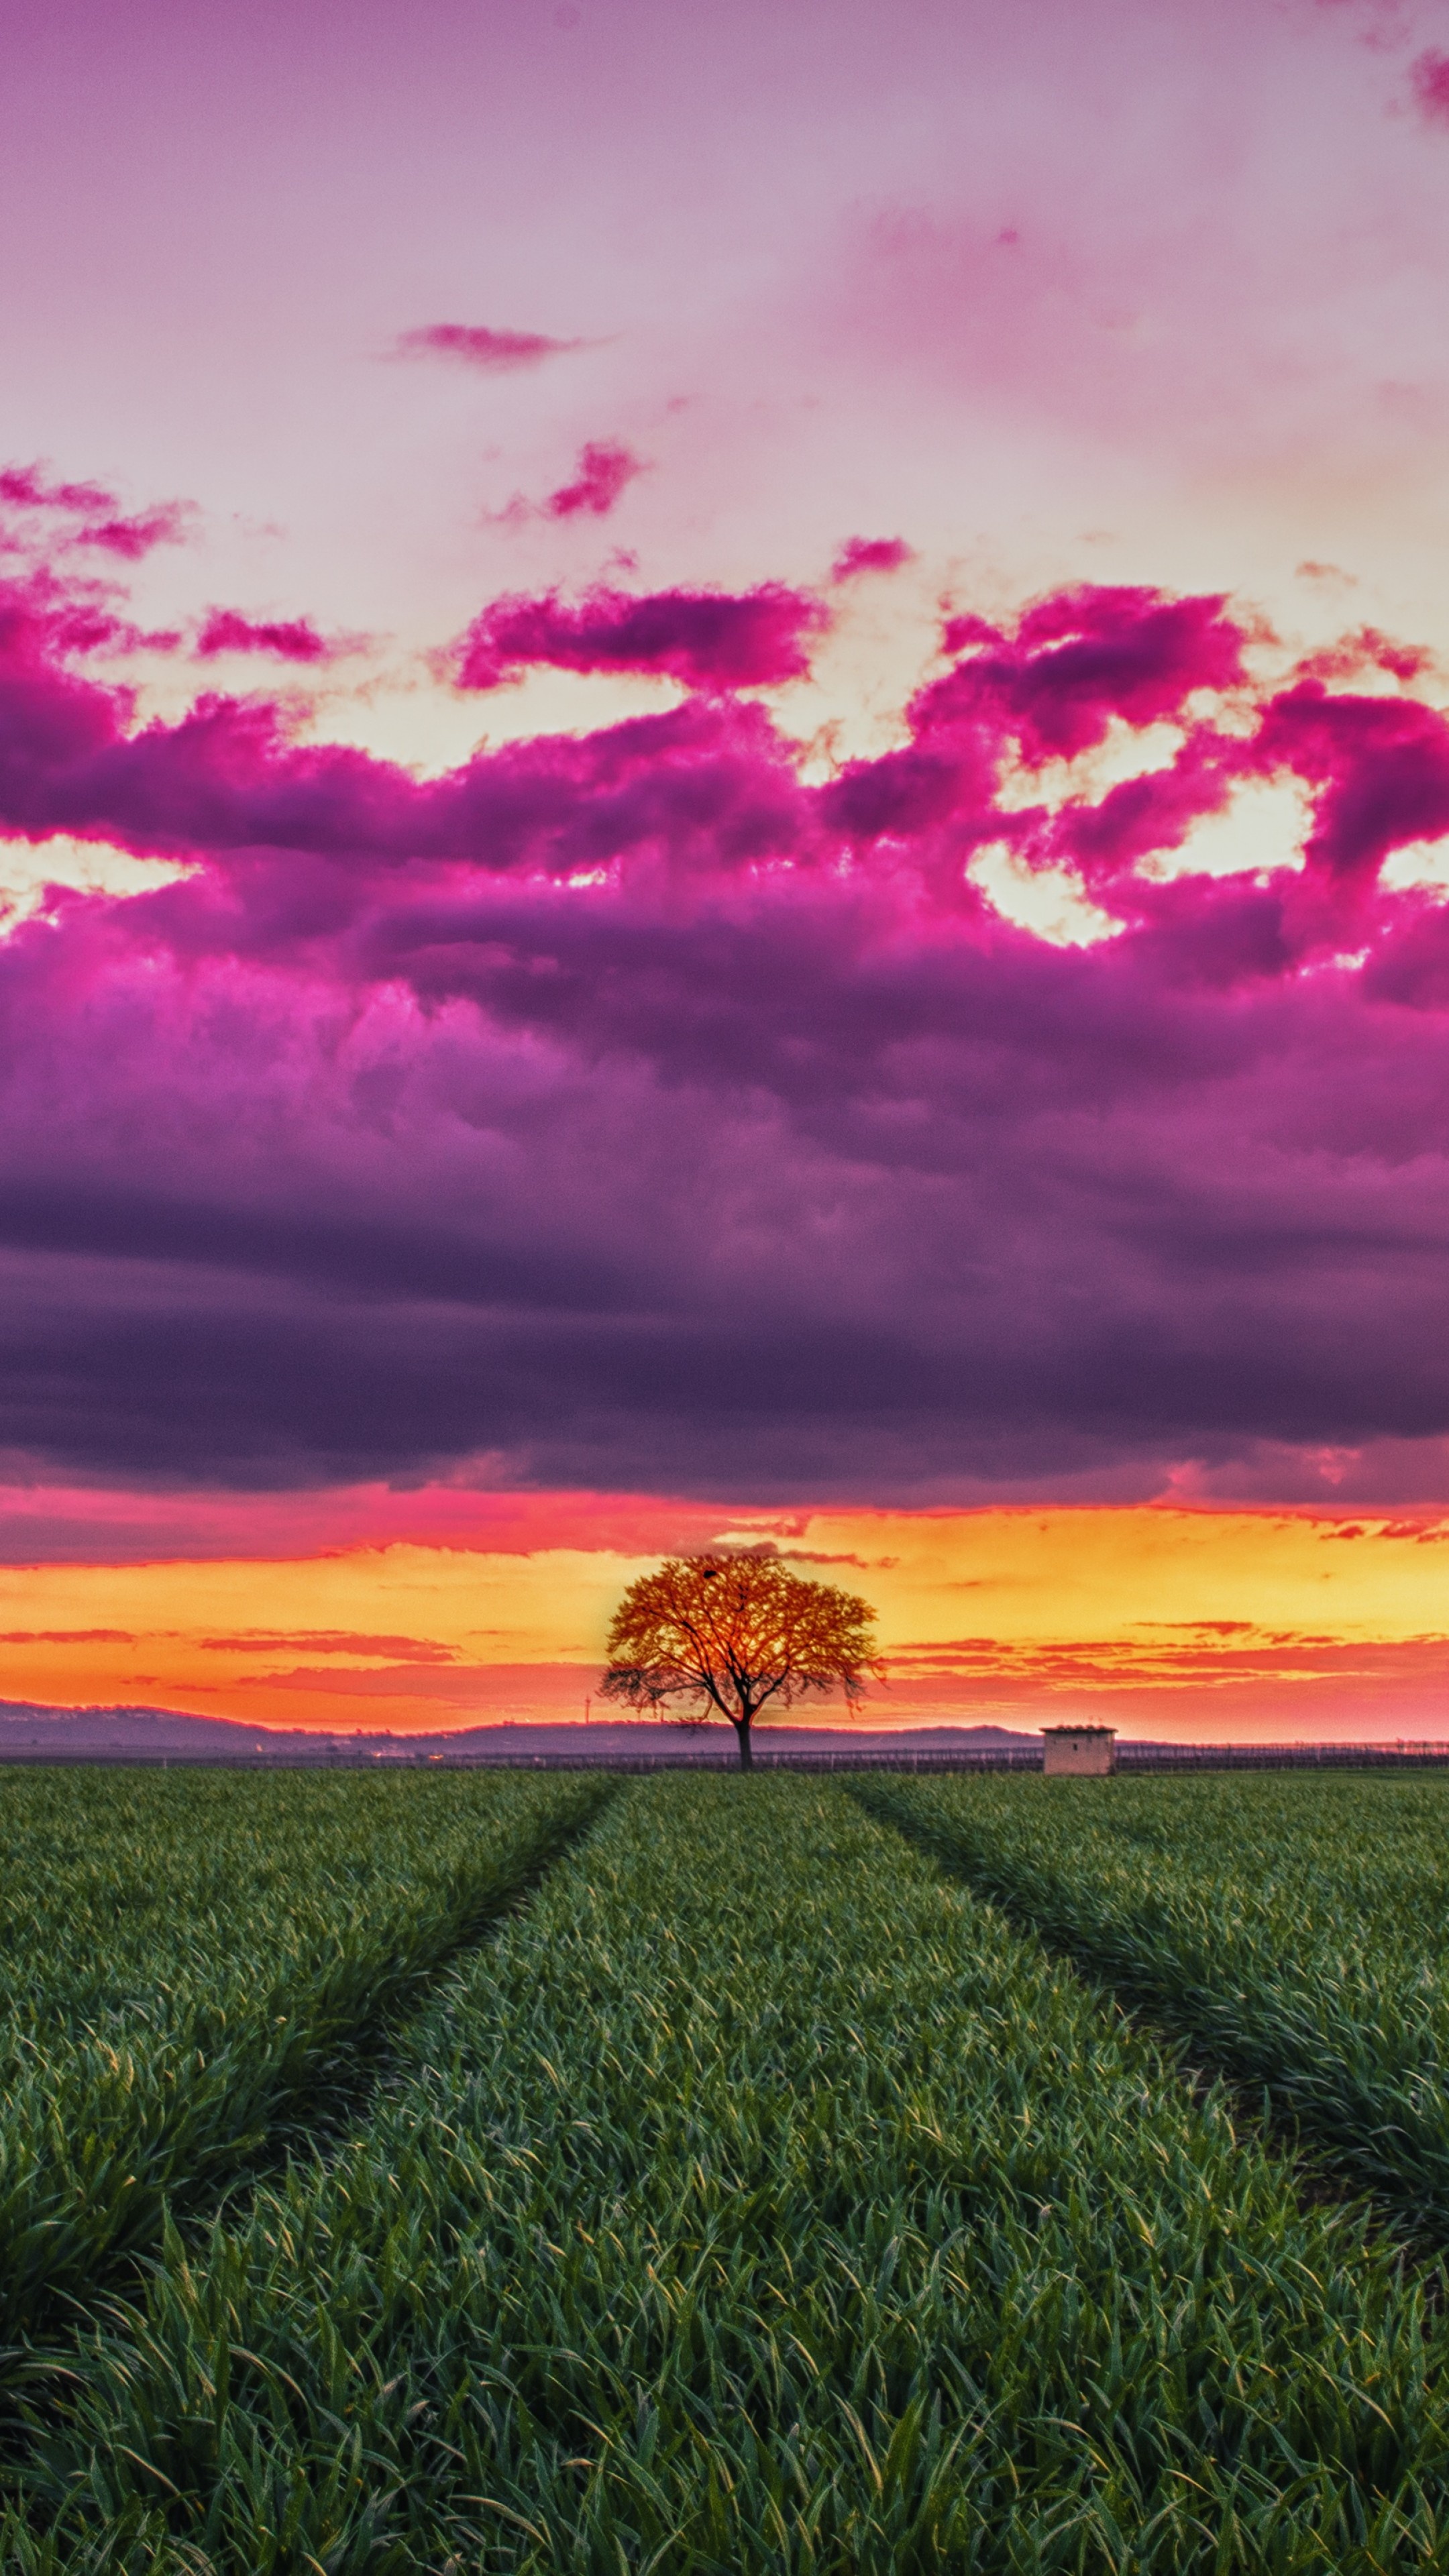 Sunset field, Sky and clouds, Tranquil scenery, Nature's palette, 2160x3840 4K Handy